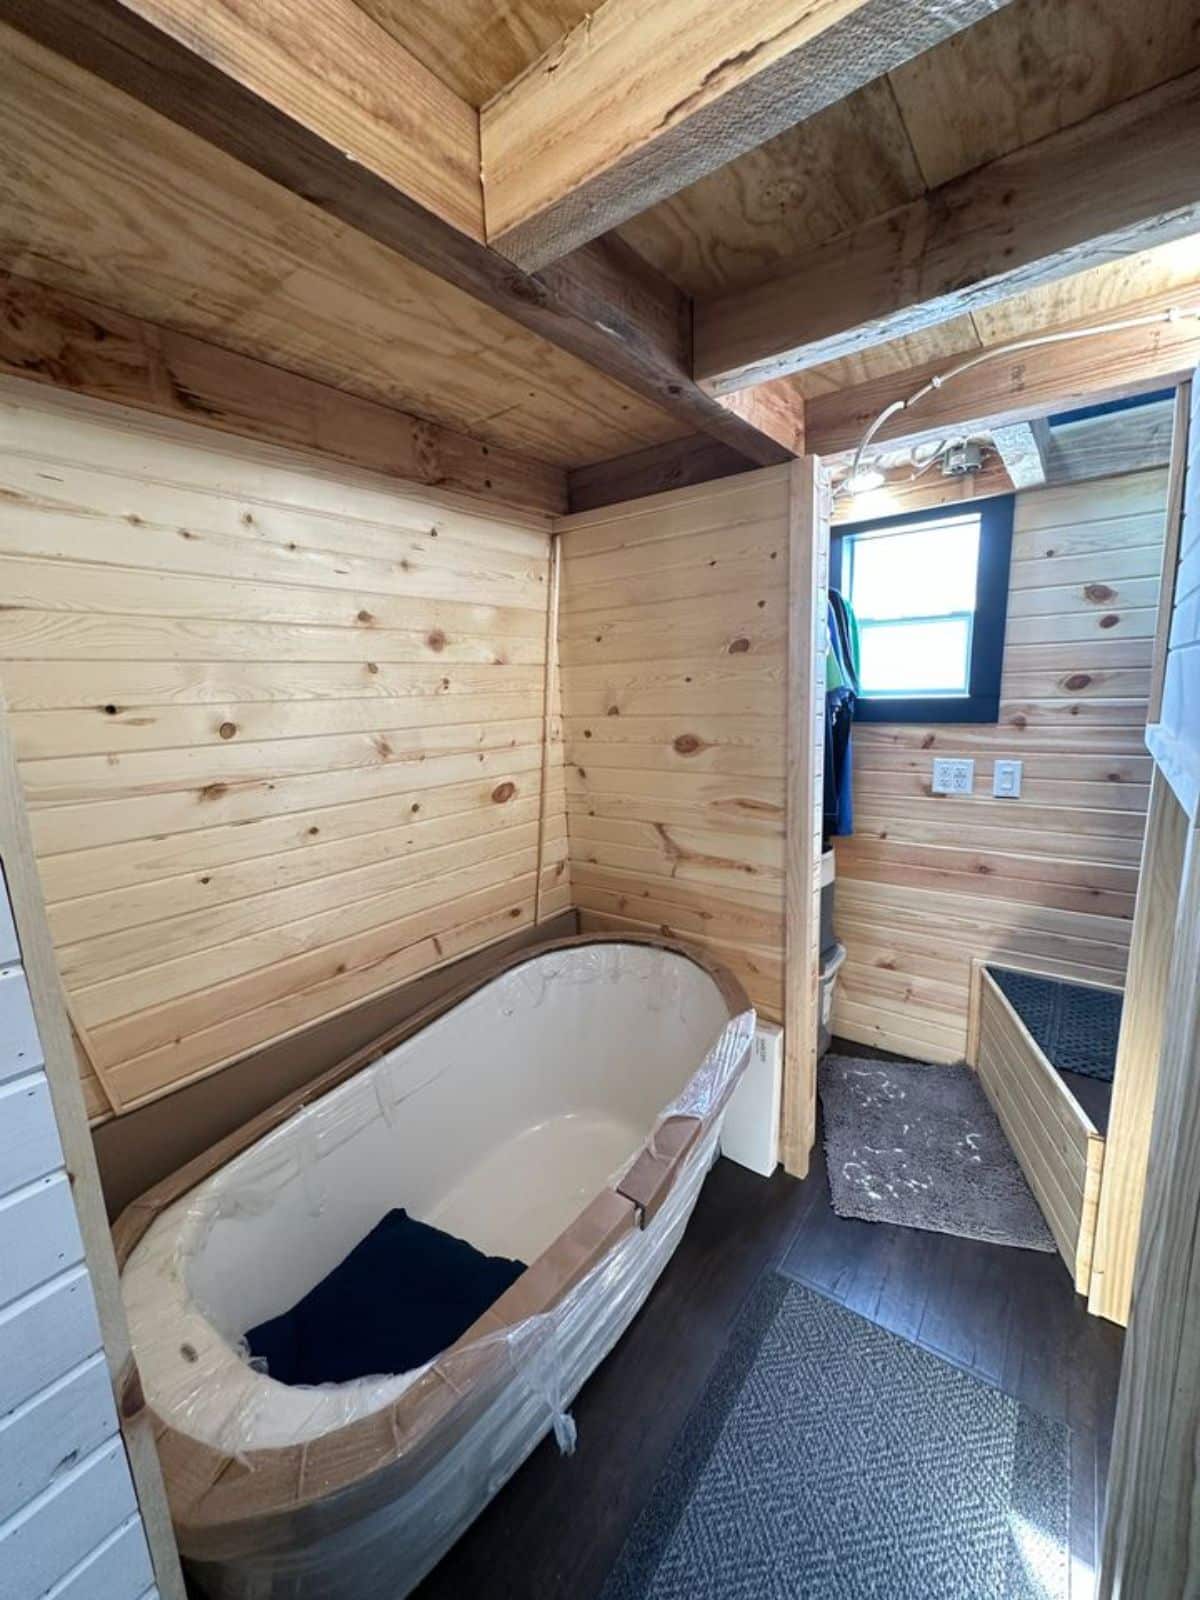 bathtub opposite to composting toilet of 32' fully furnished tiny home